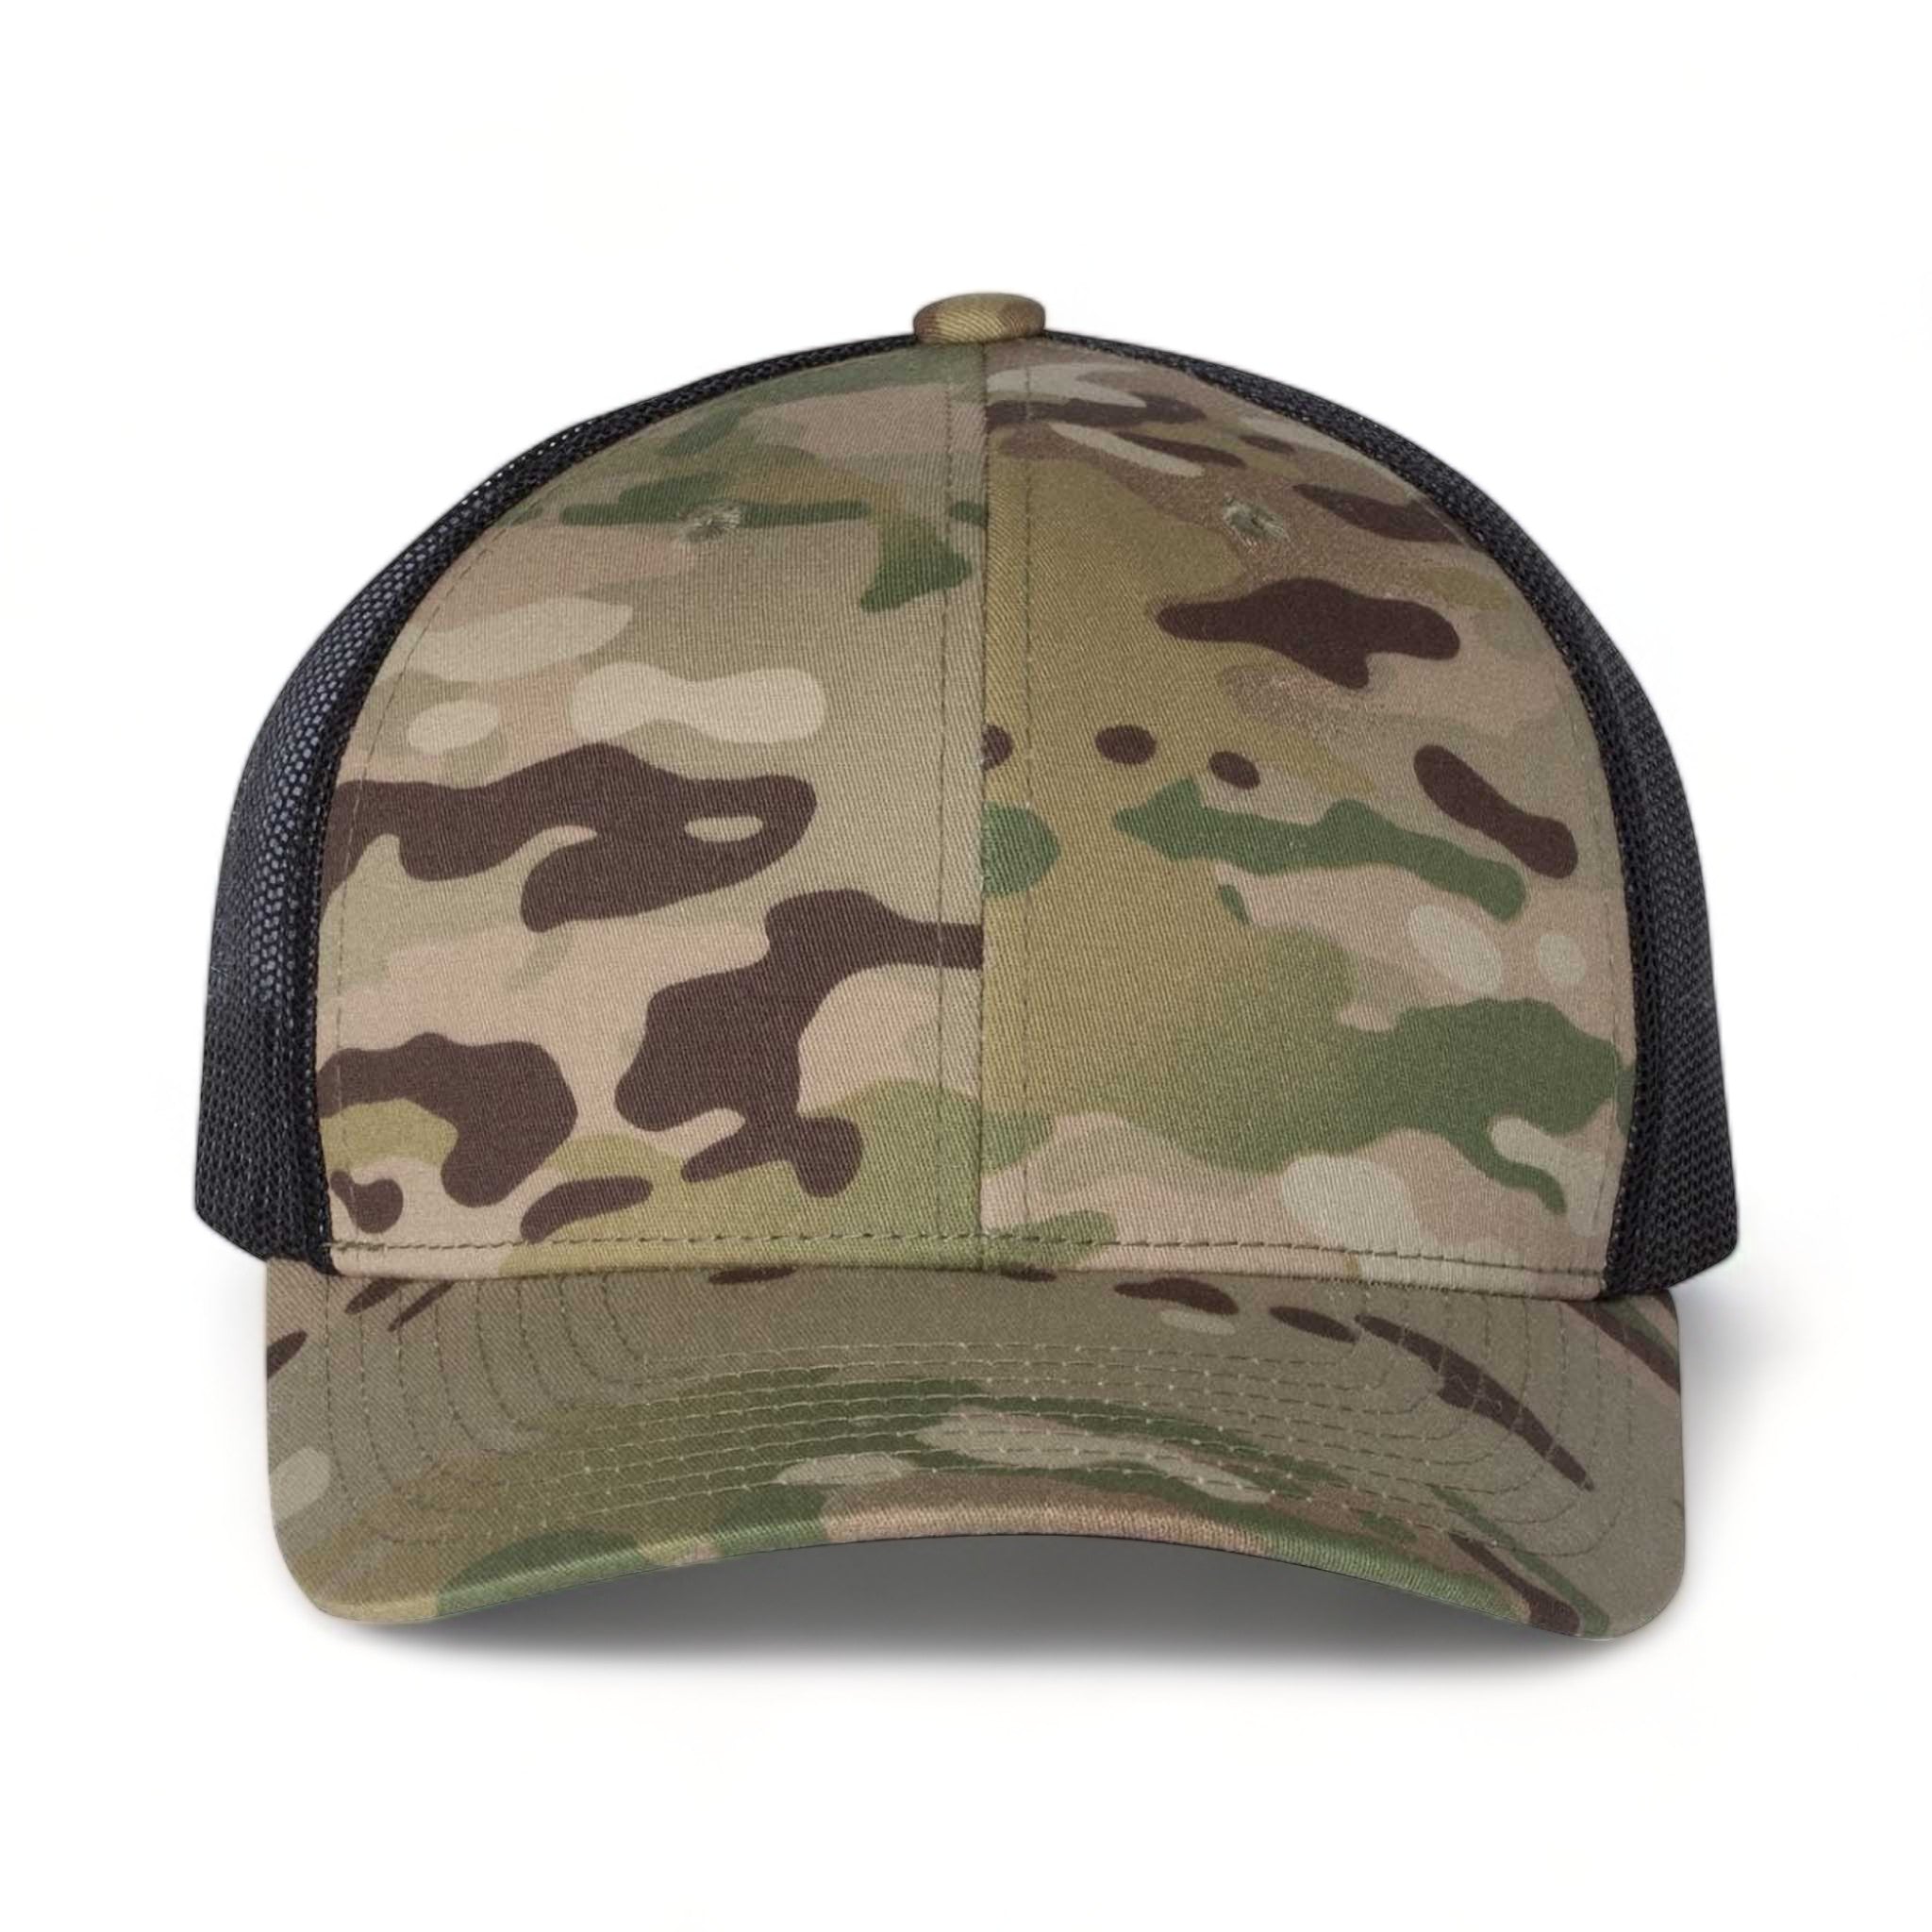 Front view of YP Classics 6606 custom hat in multicam green and black